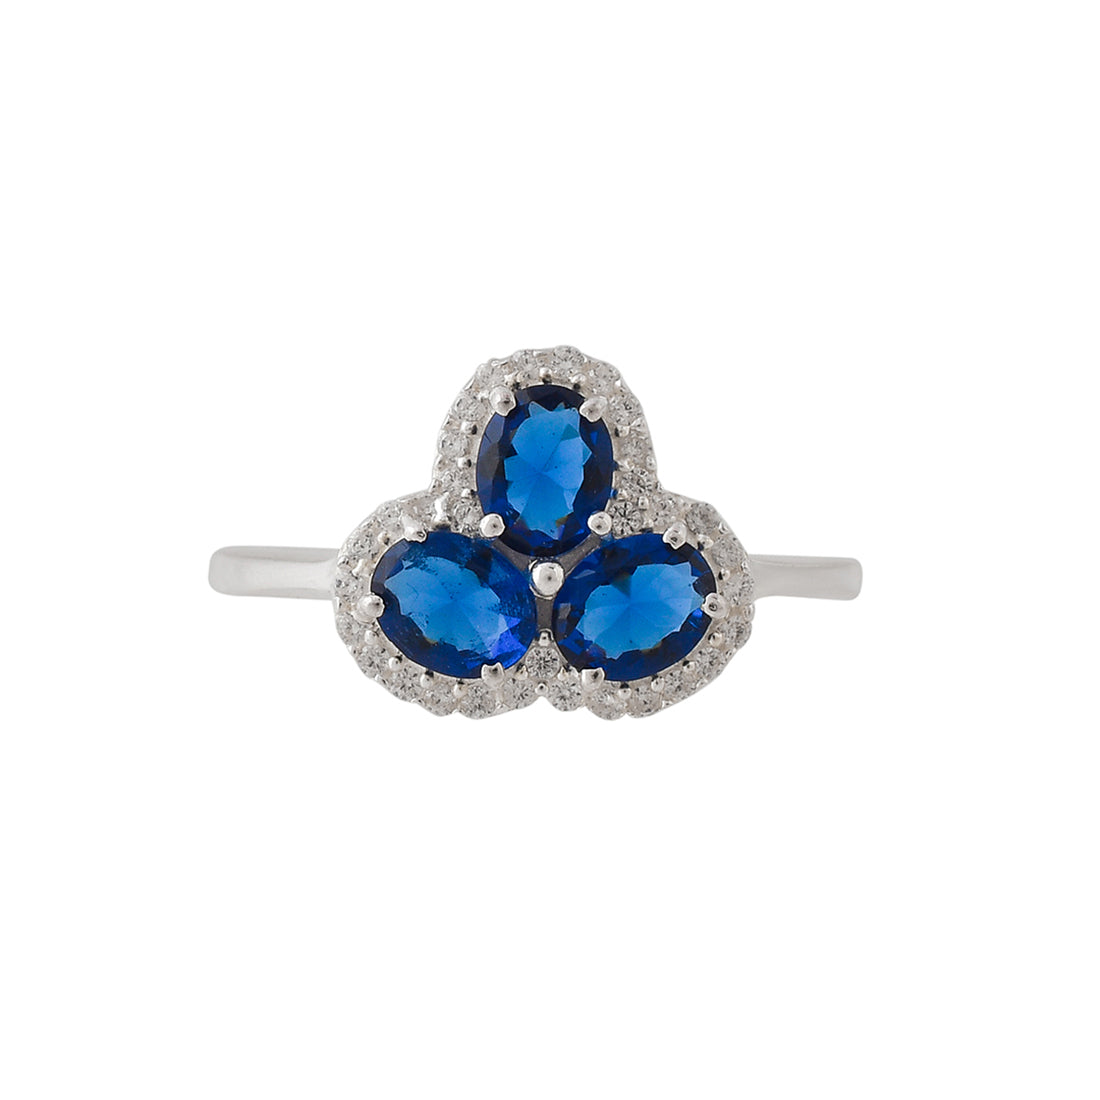 Women's Round Cut Sapphires Cluster Setting Adjustable Sterling Silver Ring - Voylla